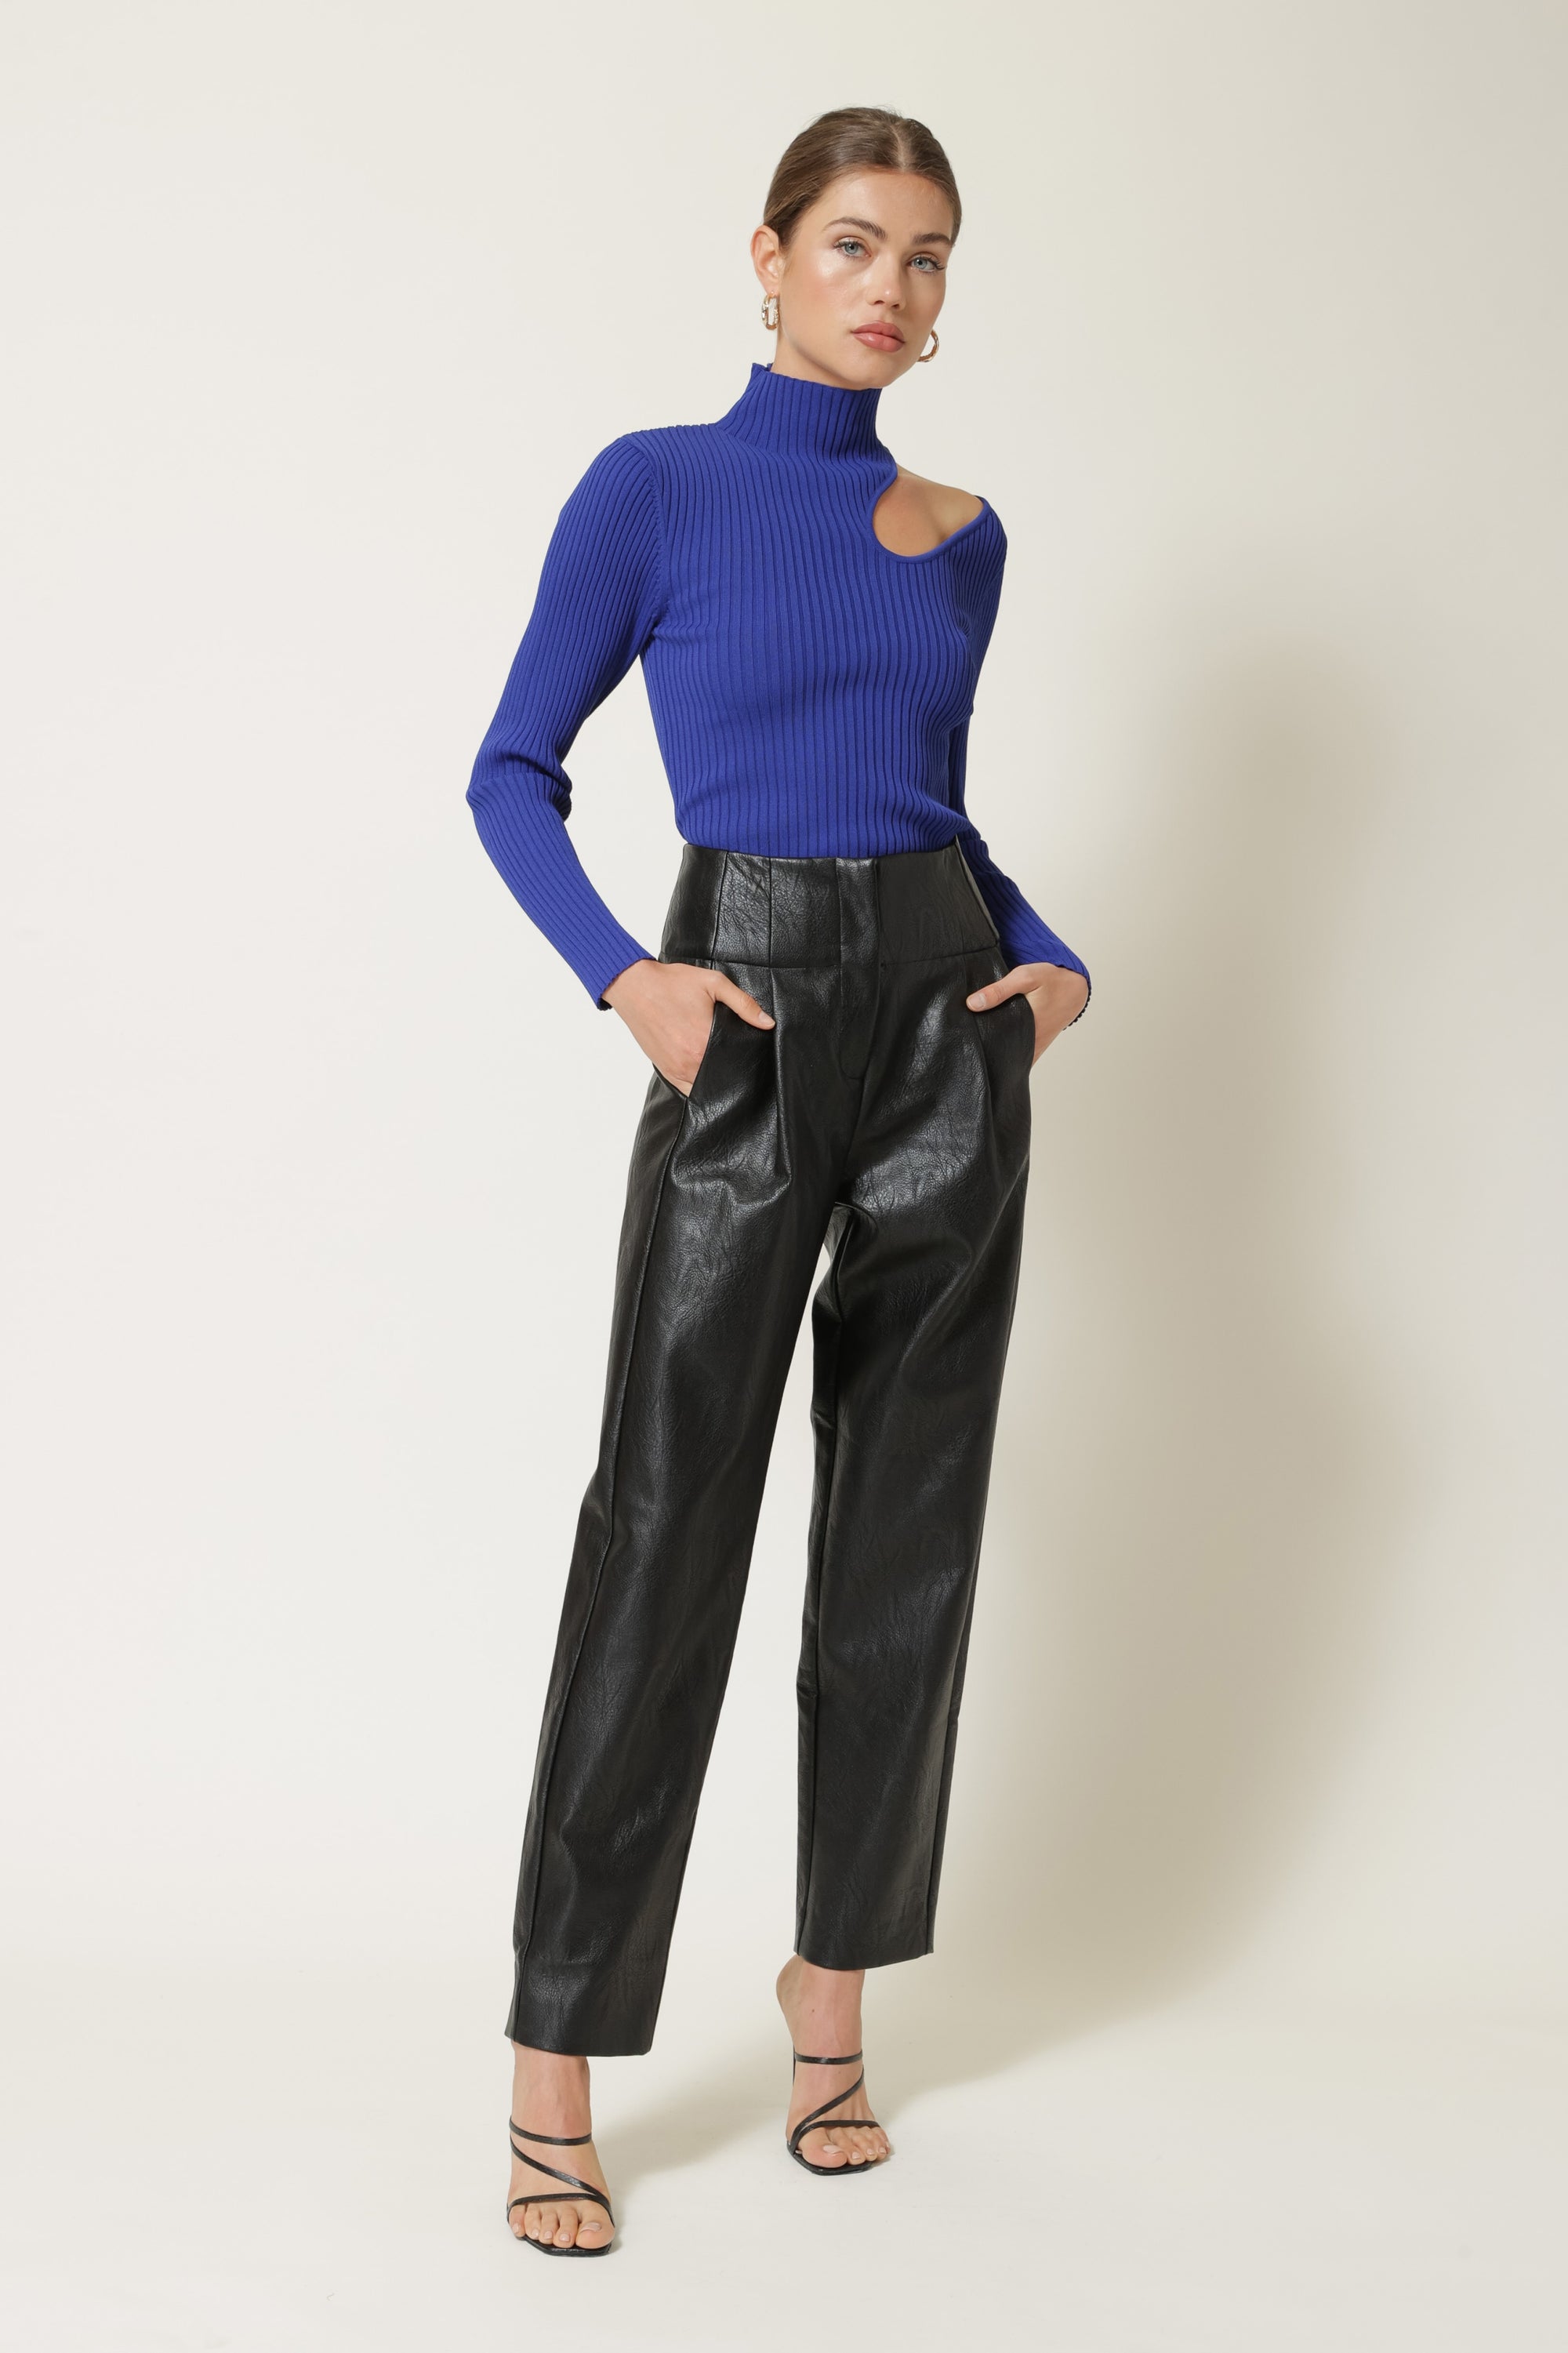 Nico Cutout Sweater in Royal Blue